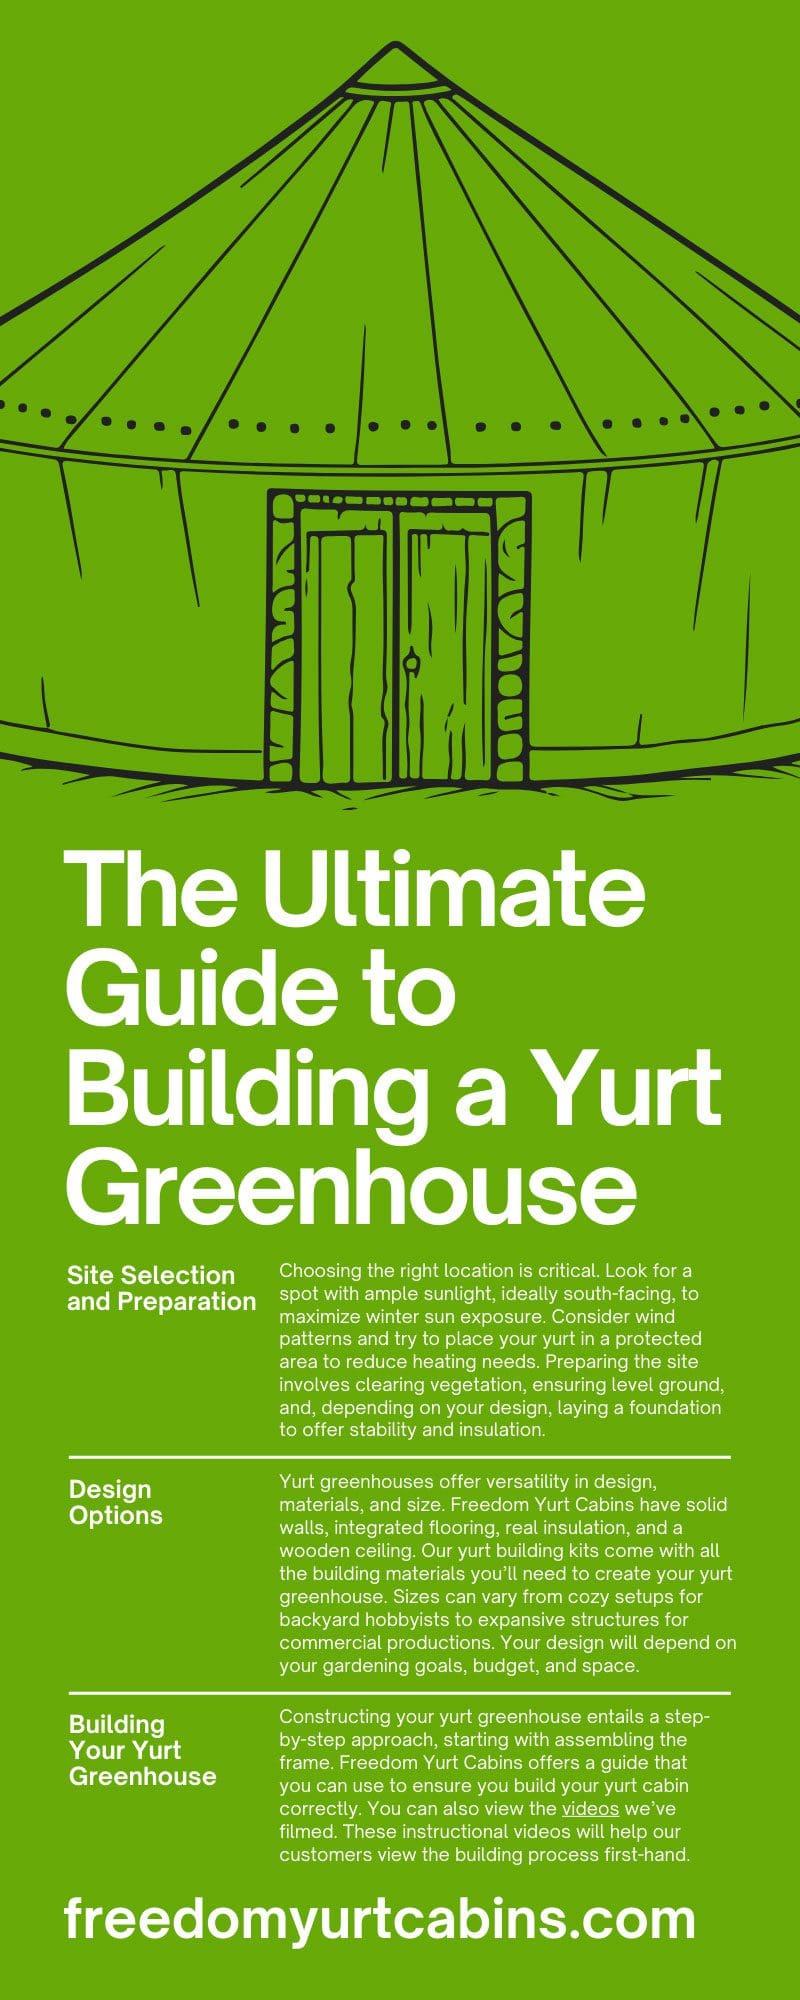 The Ultimate Guide to Building a Yurt Greenhouse